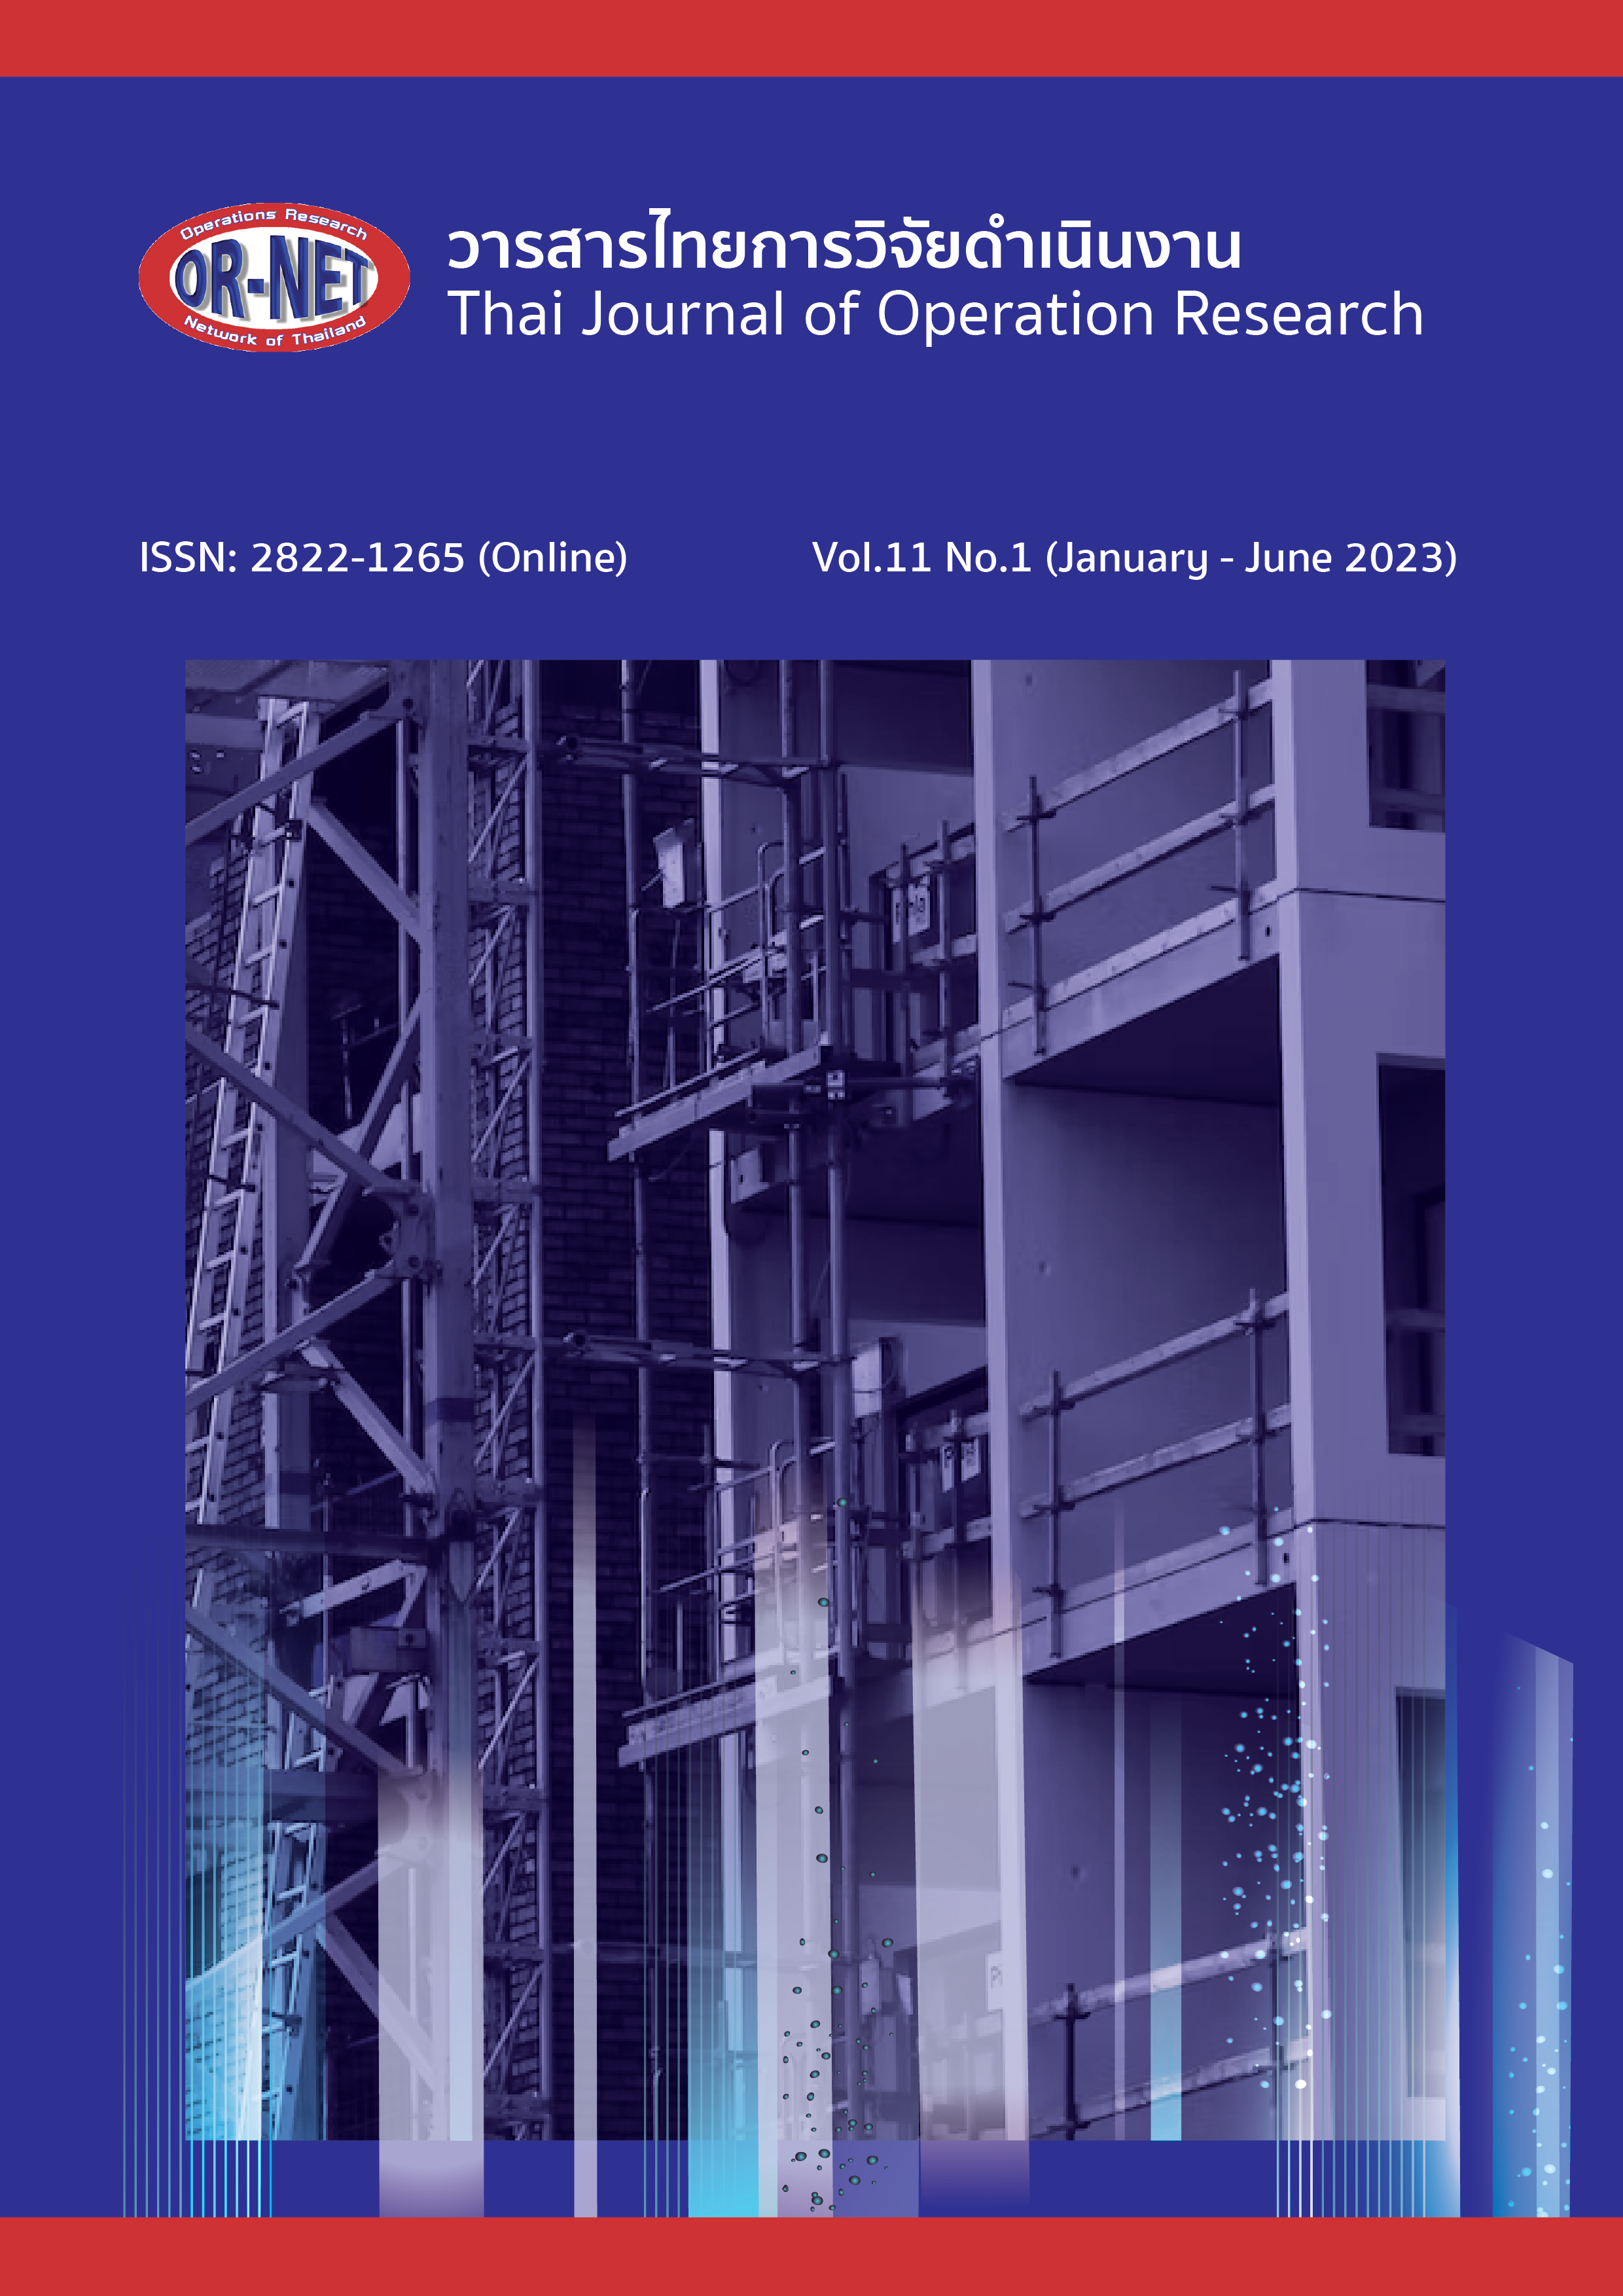 					View Vol. 11 No. 1 (2023): Thai Journal of Operations Research: TJOR Vol 11 No 1 (January - June 2023)
				